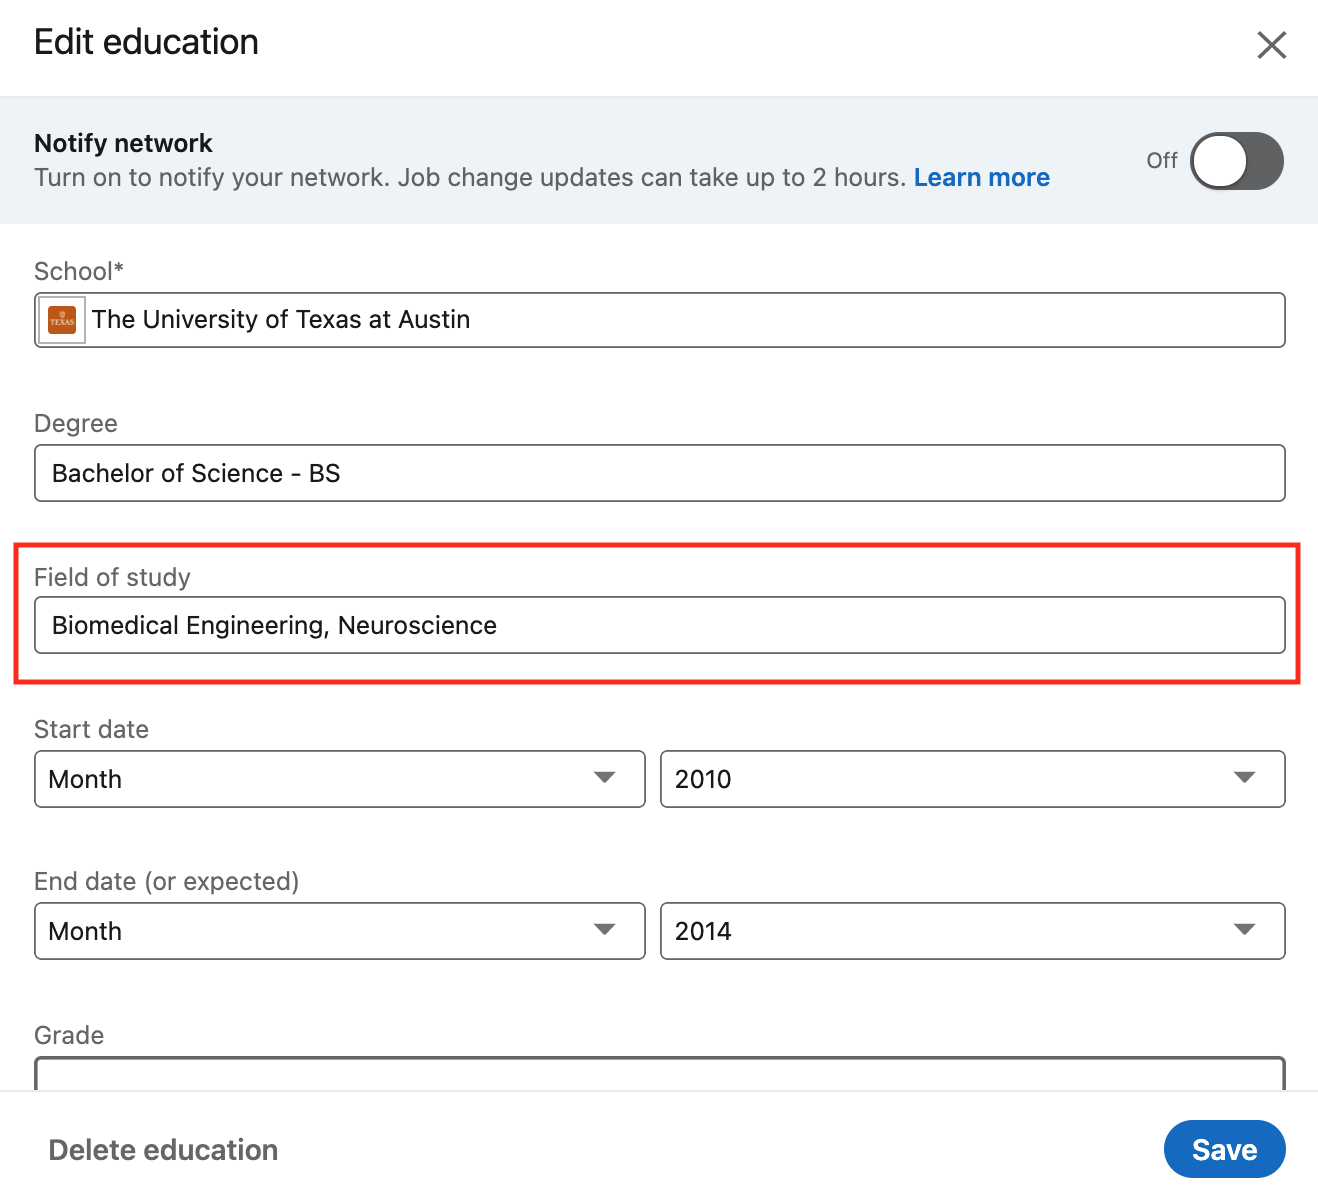 List a double major by editing the “Field of Study” section in the dialogue box that appears when you hit the pencil icon next to your “Education” section of your LinkedIn profile